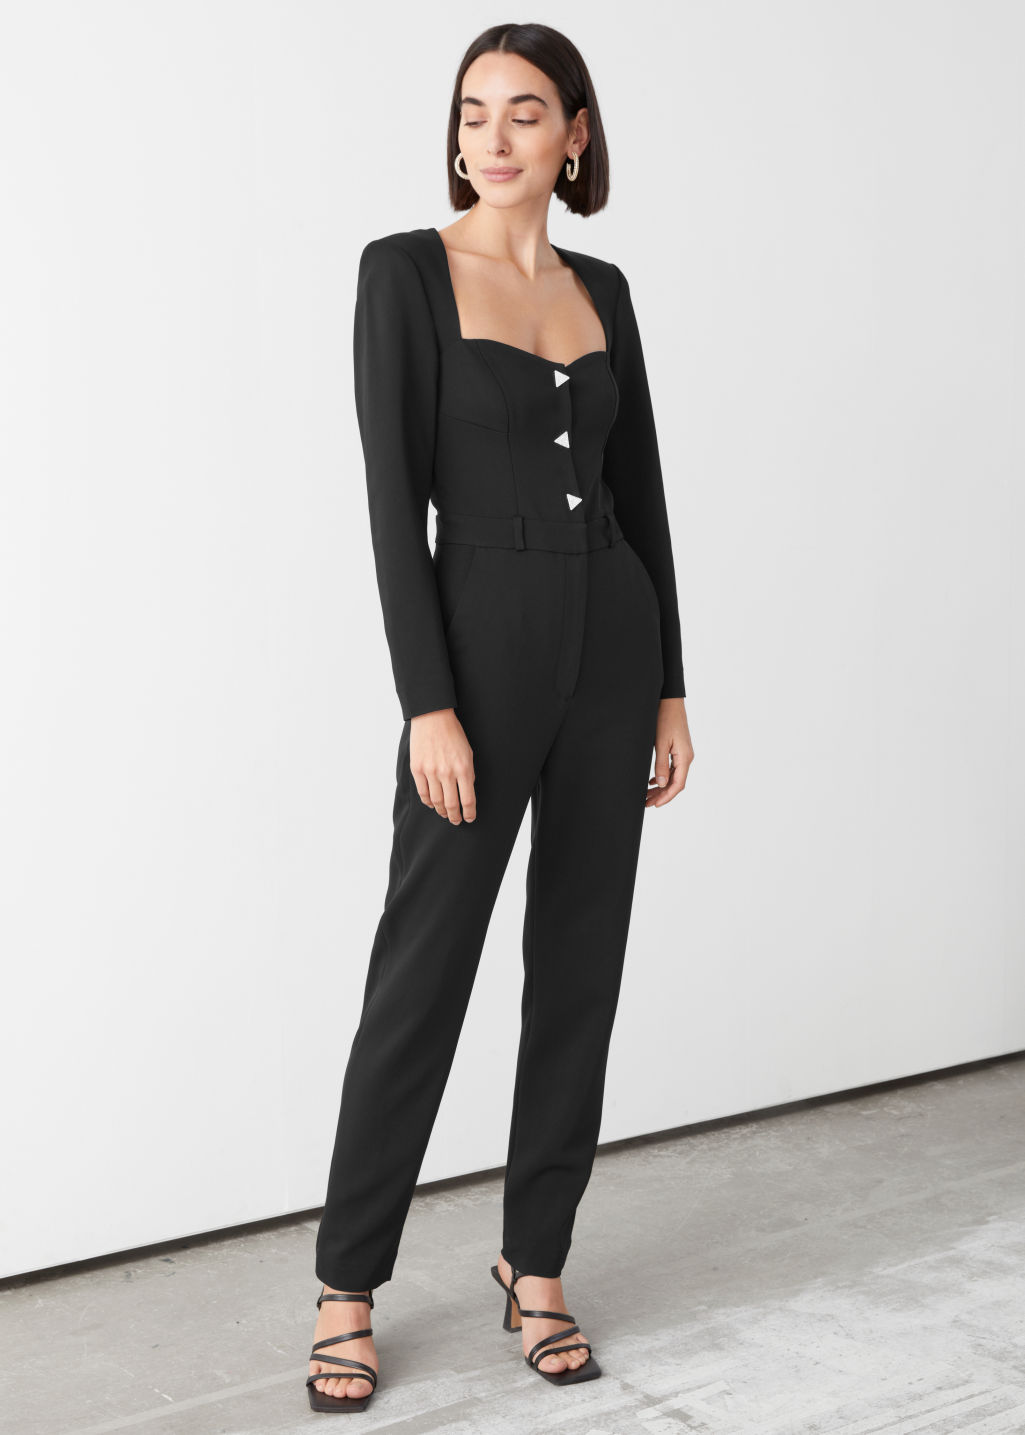 Padded Shoulder Sweetheart Neckline Jumpsuit - Black - Jumpsuits & Playsuits - & Other Stories - Click Image to Close